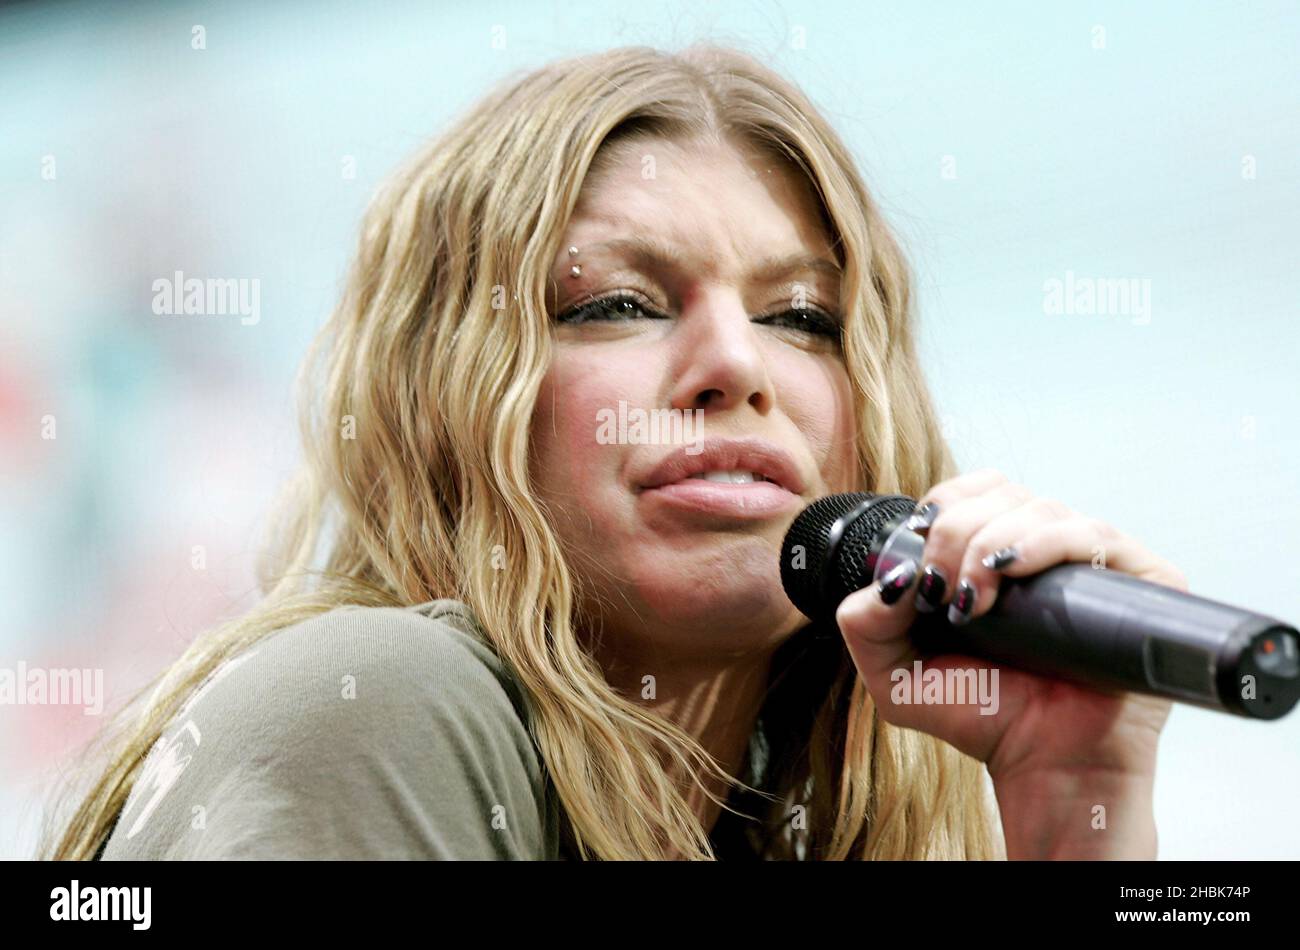 Fergie Of Black Eyed Peas Performs During The Charity Concert Live Earth At Wembley Stadium In